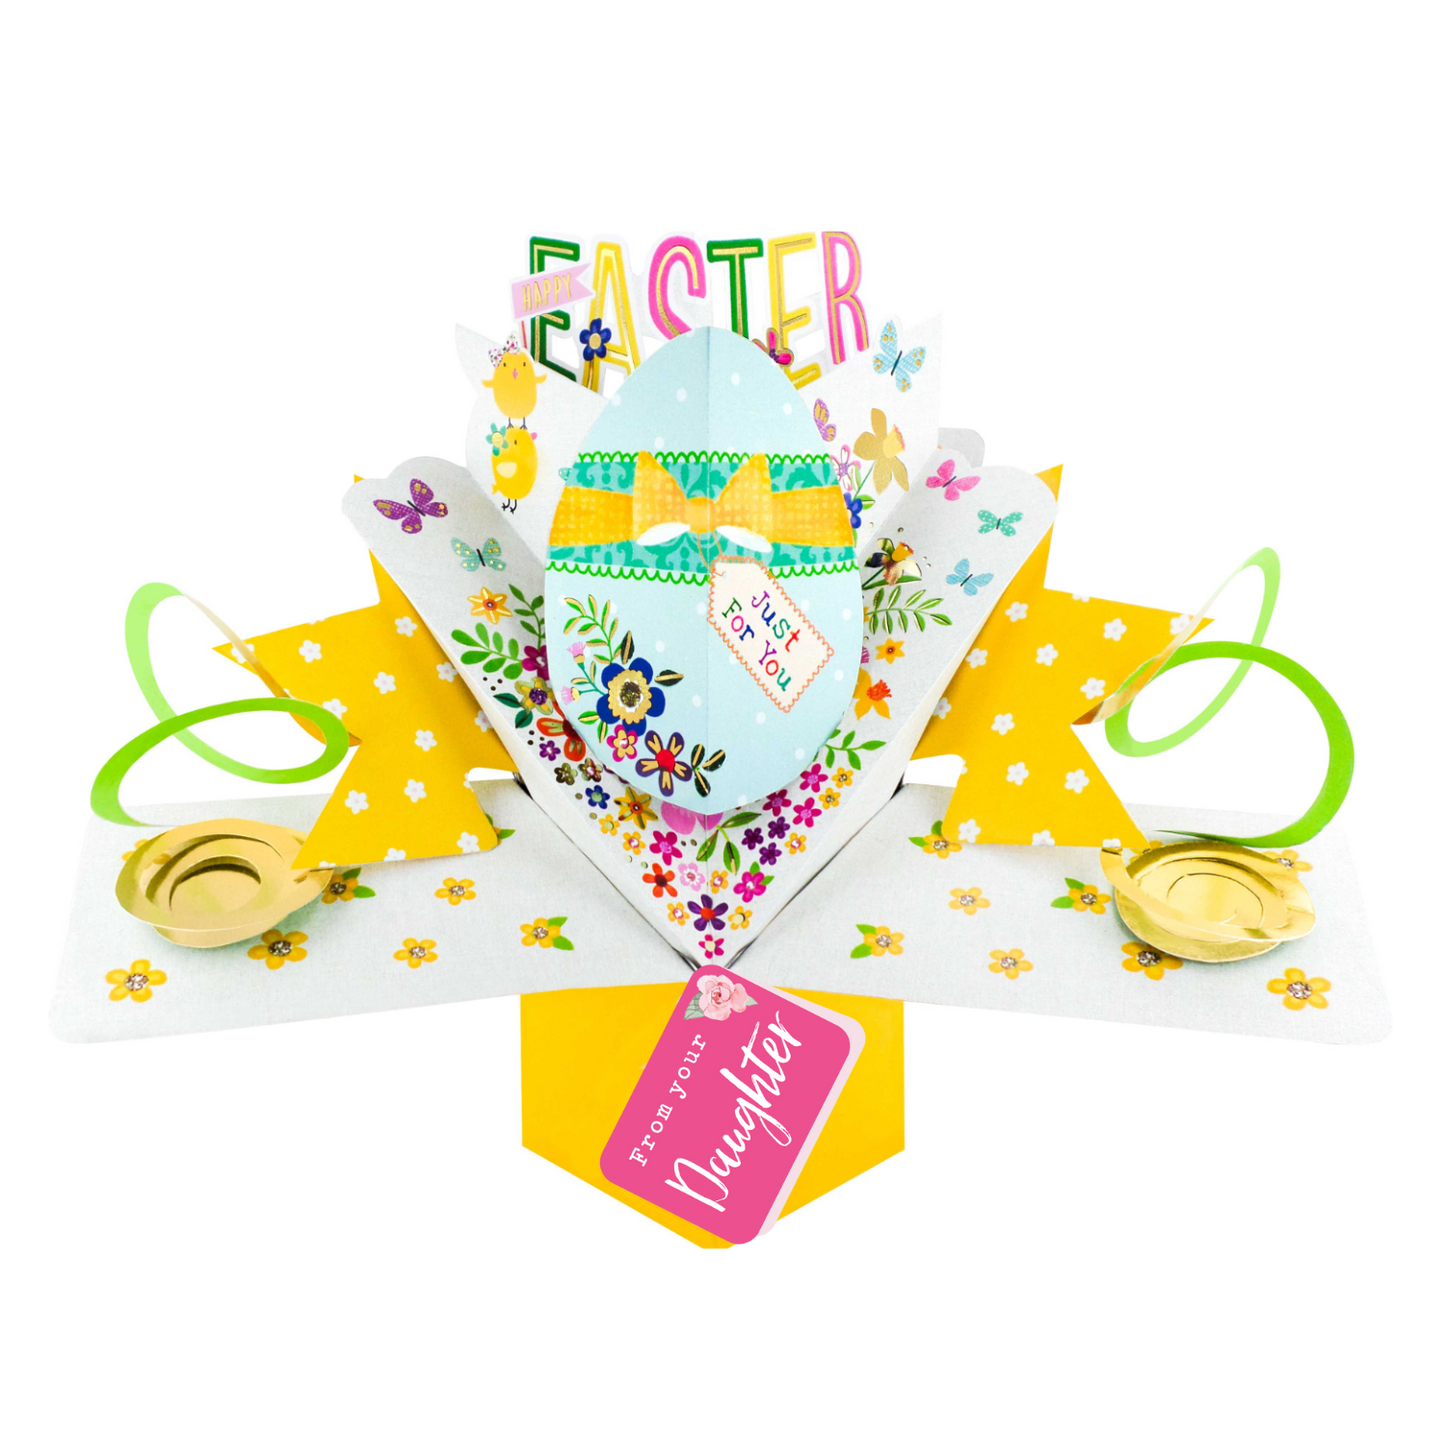 Mum From Your Daughter Happy Easter Decorated Egg Pop Up Easter Card